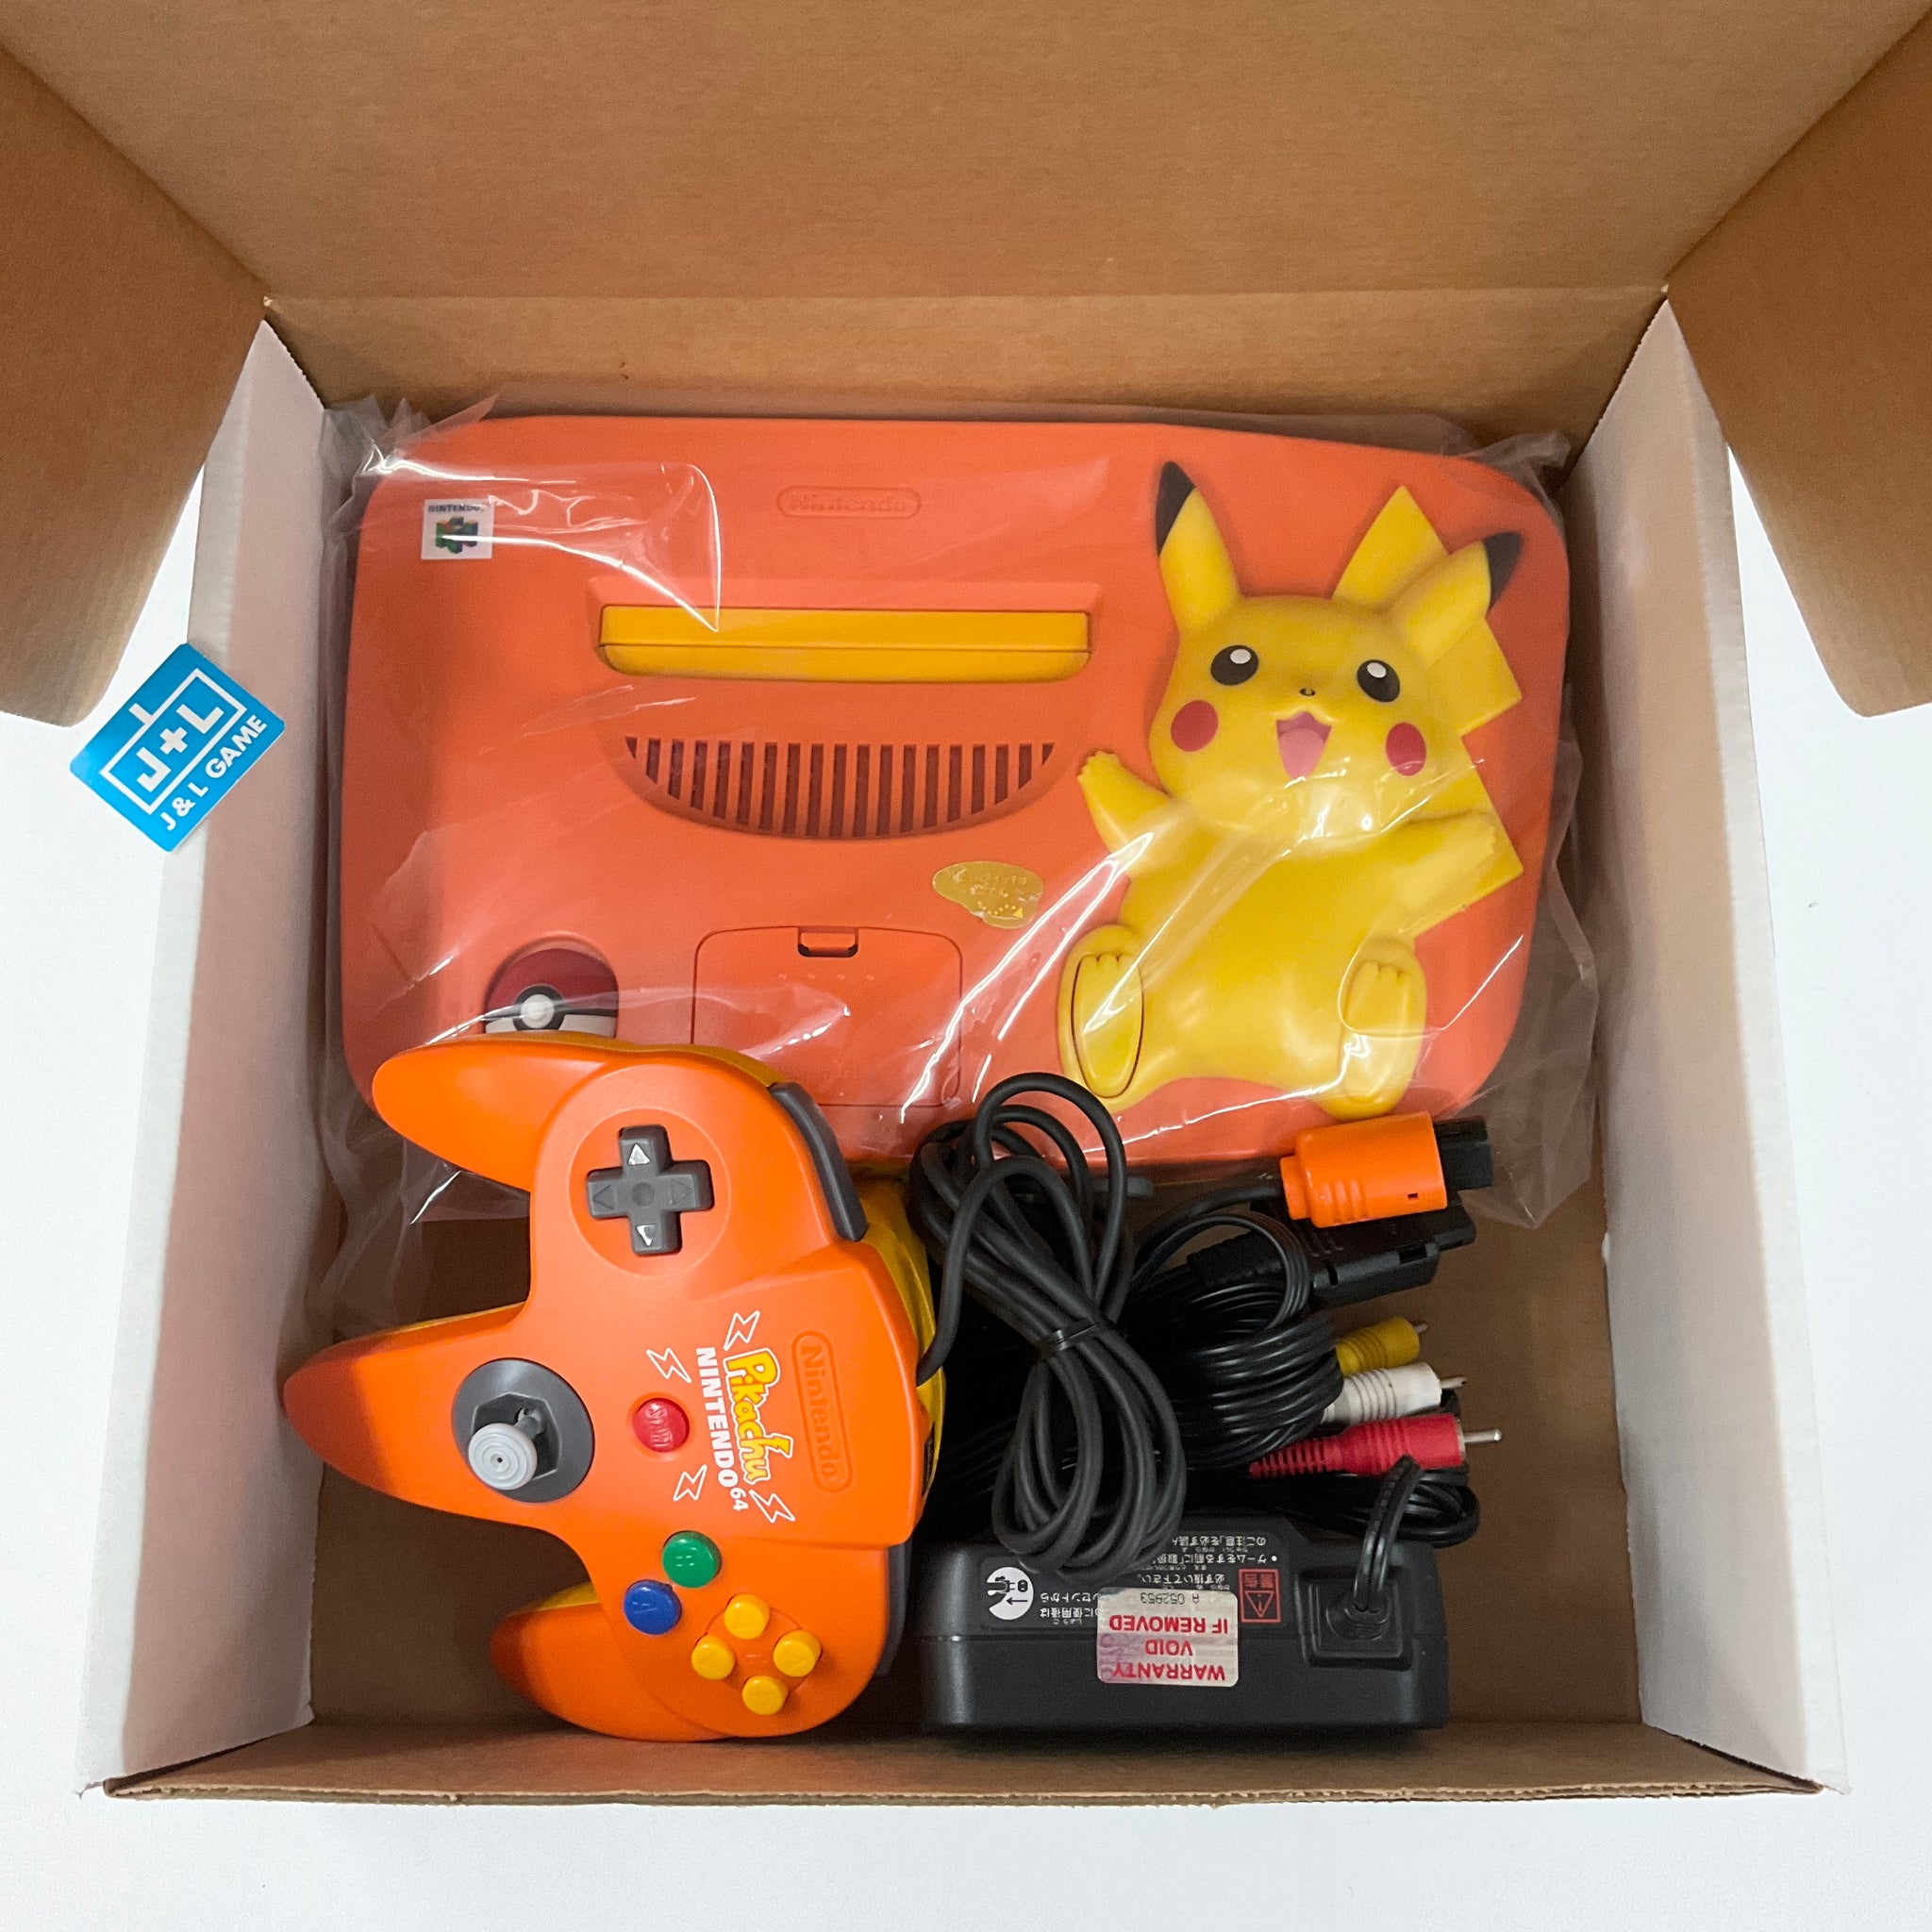 Nintendo 64 Hardware Console (Pikachu Edition) (Orange and Yellow) - (N64) Nintendo 64 (Japanese Import) [Pre-Owned] CONSOLE Nintendo   